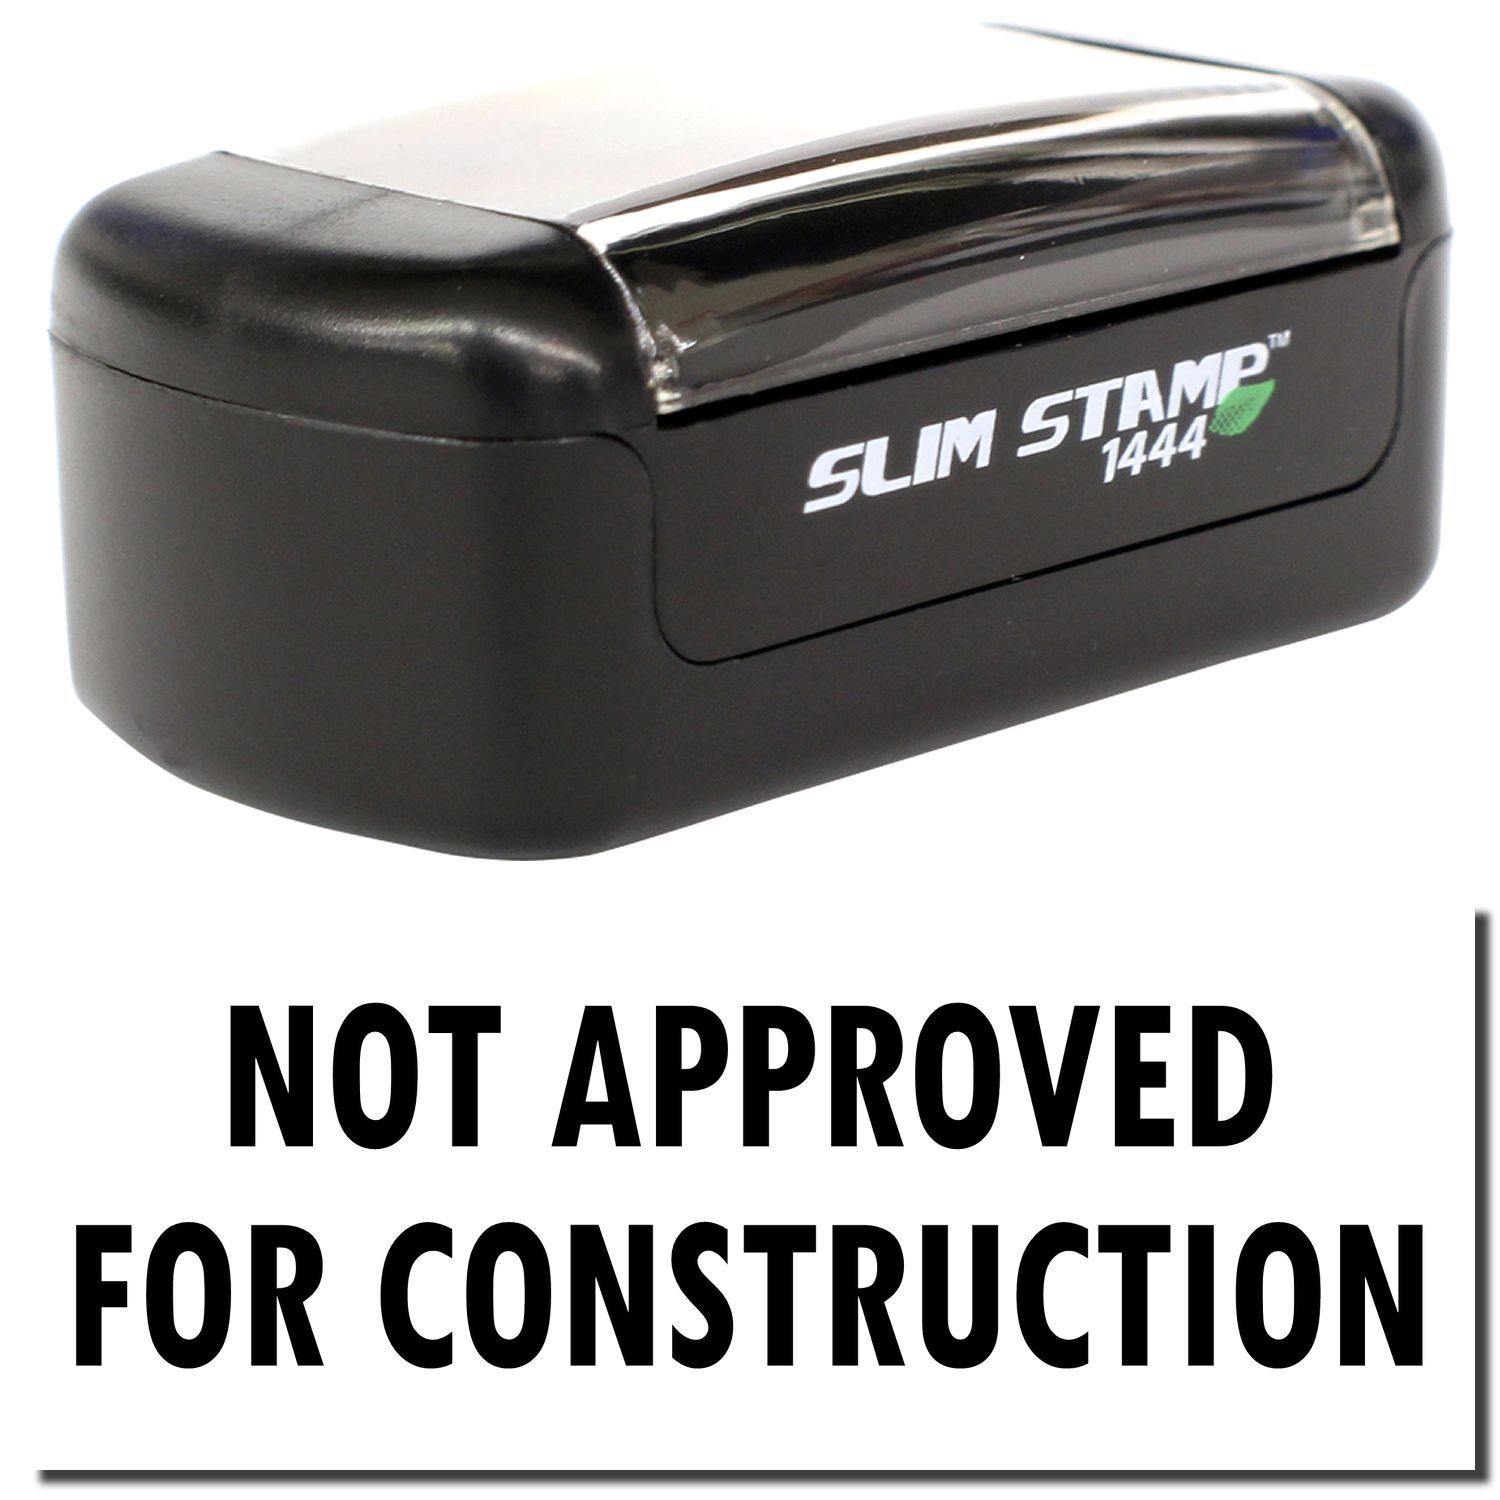 A stock office pre-inked stamp with a stamped image showing how the text "NOT APPROVED FOR CONSTRUCTION" is displayed after stamping.